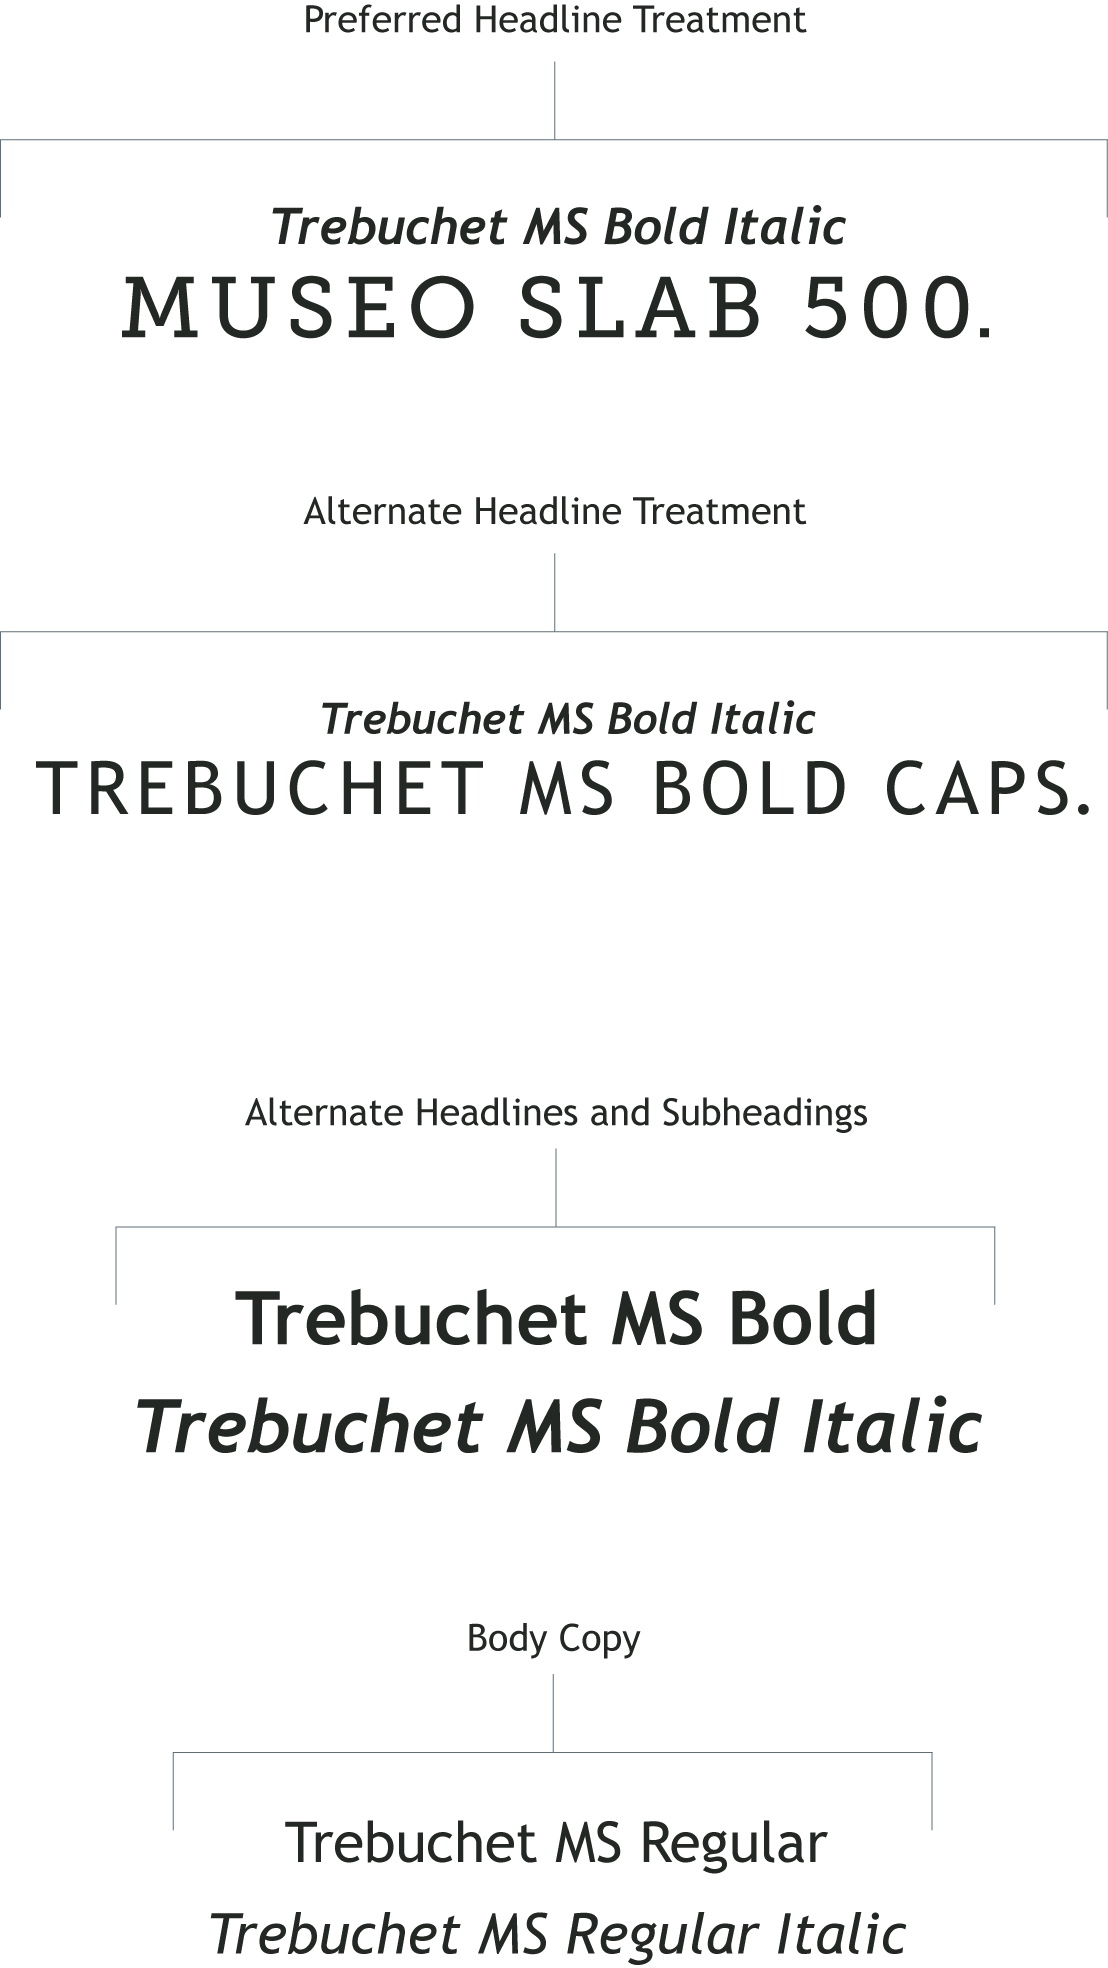 Examples of treatments showing the preferred and alternate for headline and subheadings plus body copy